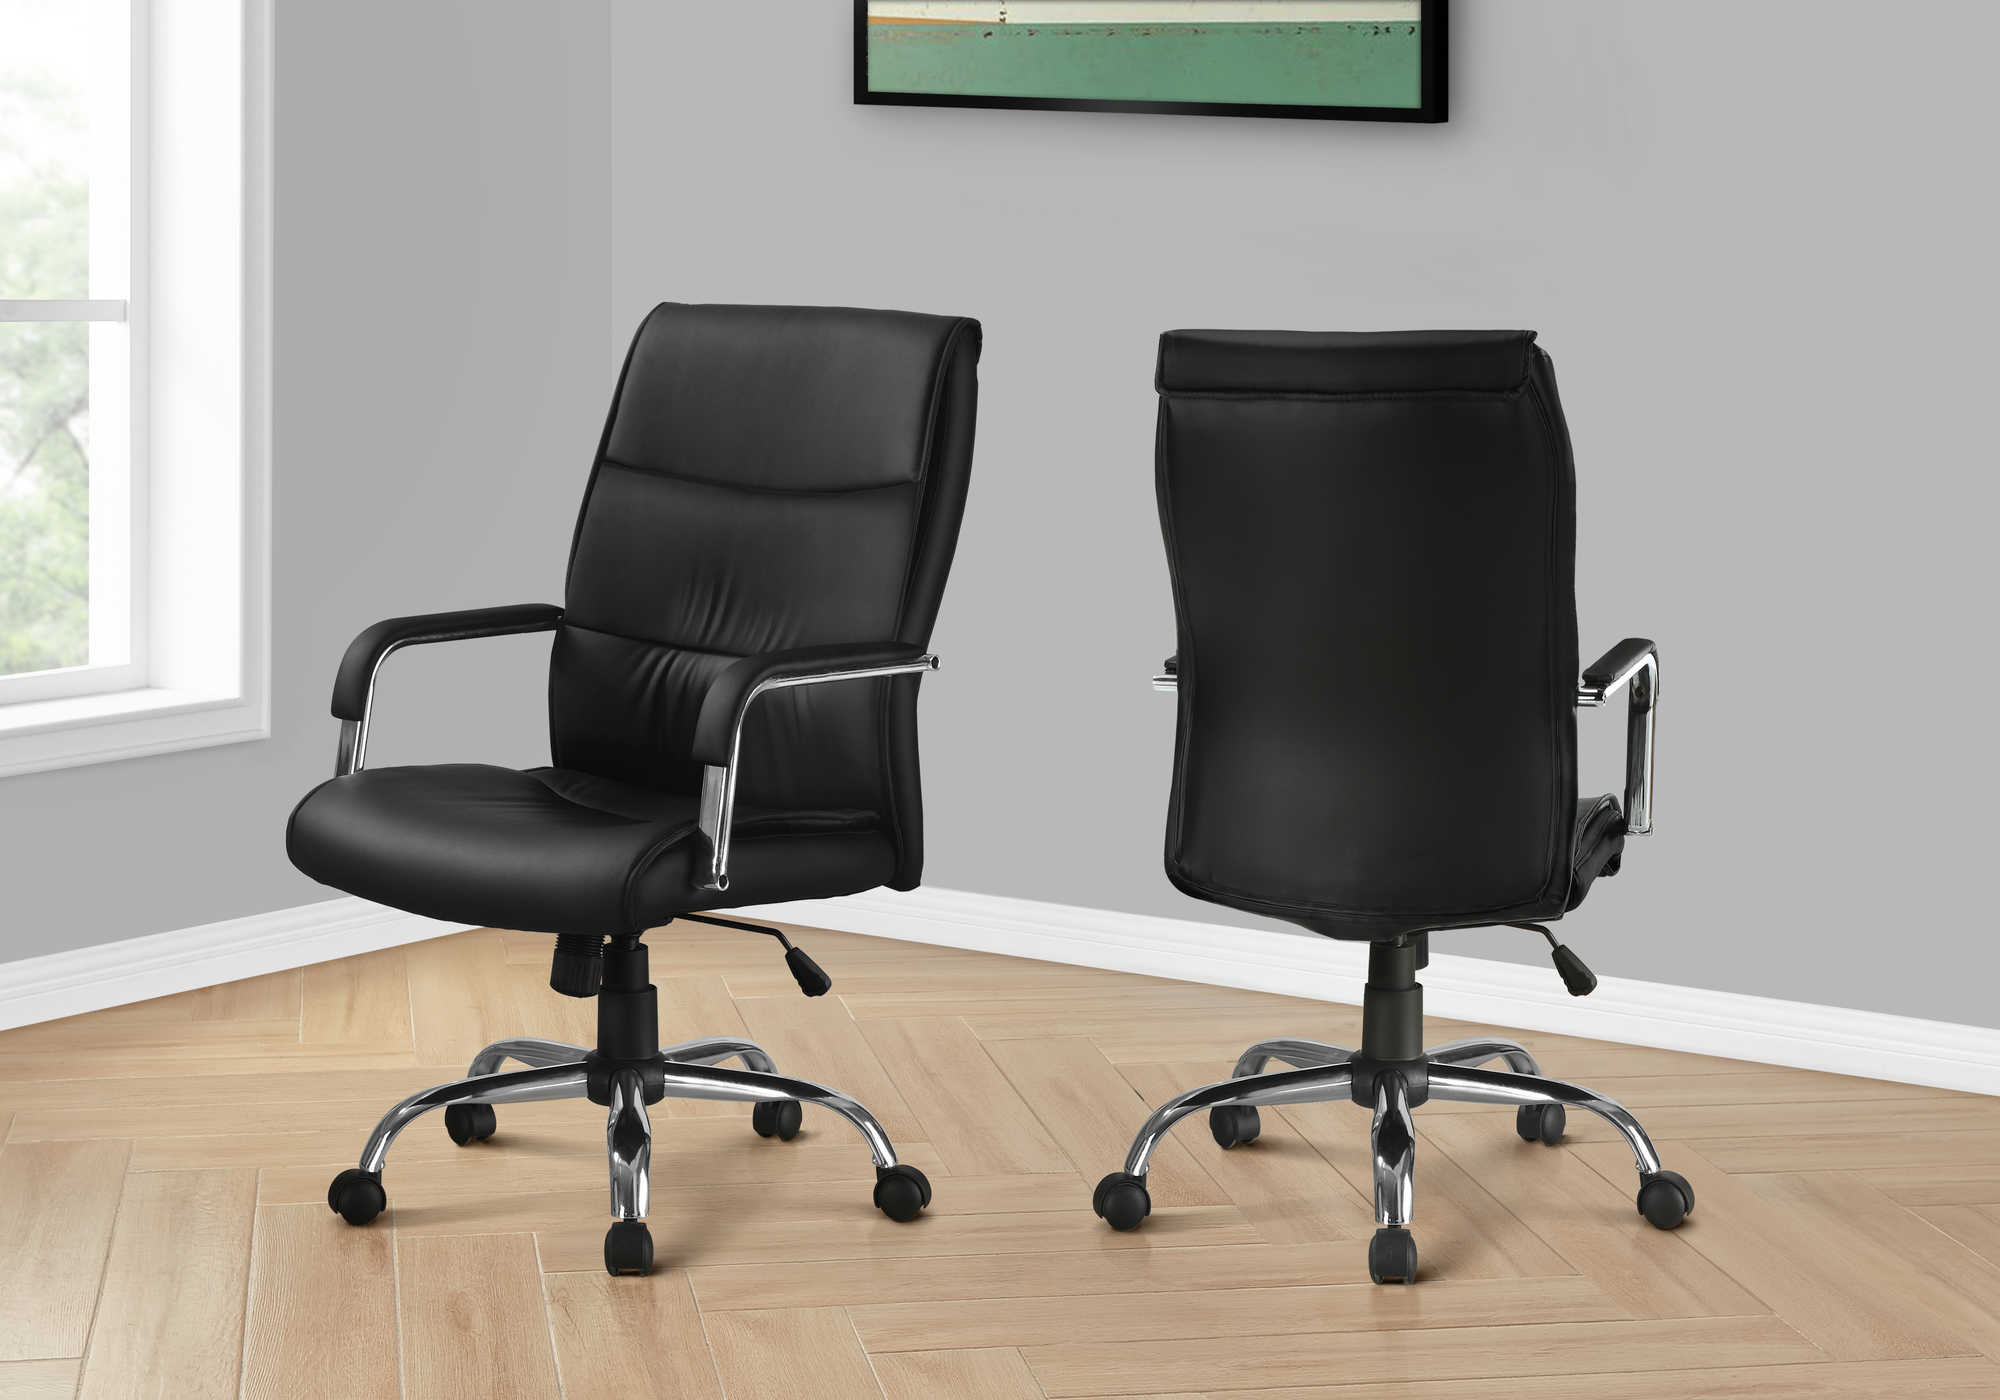 OFFICE CHAIR - BLACK LEATHER-LOOK FABRIC